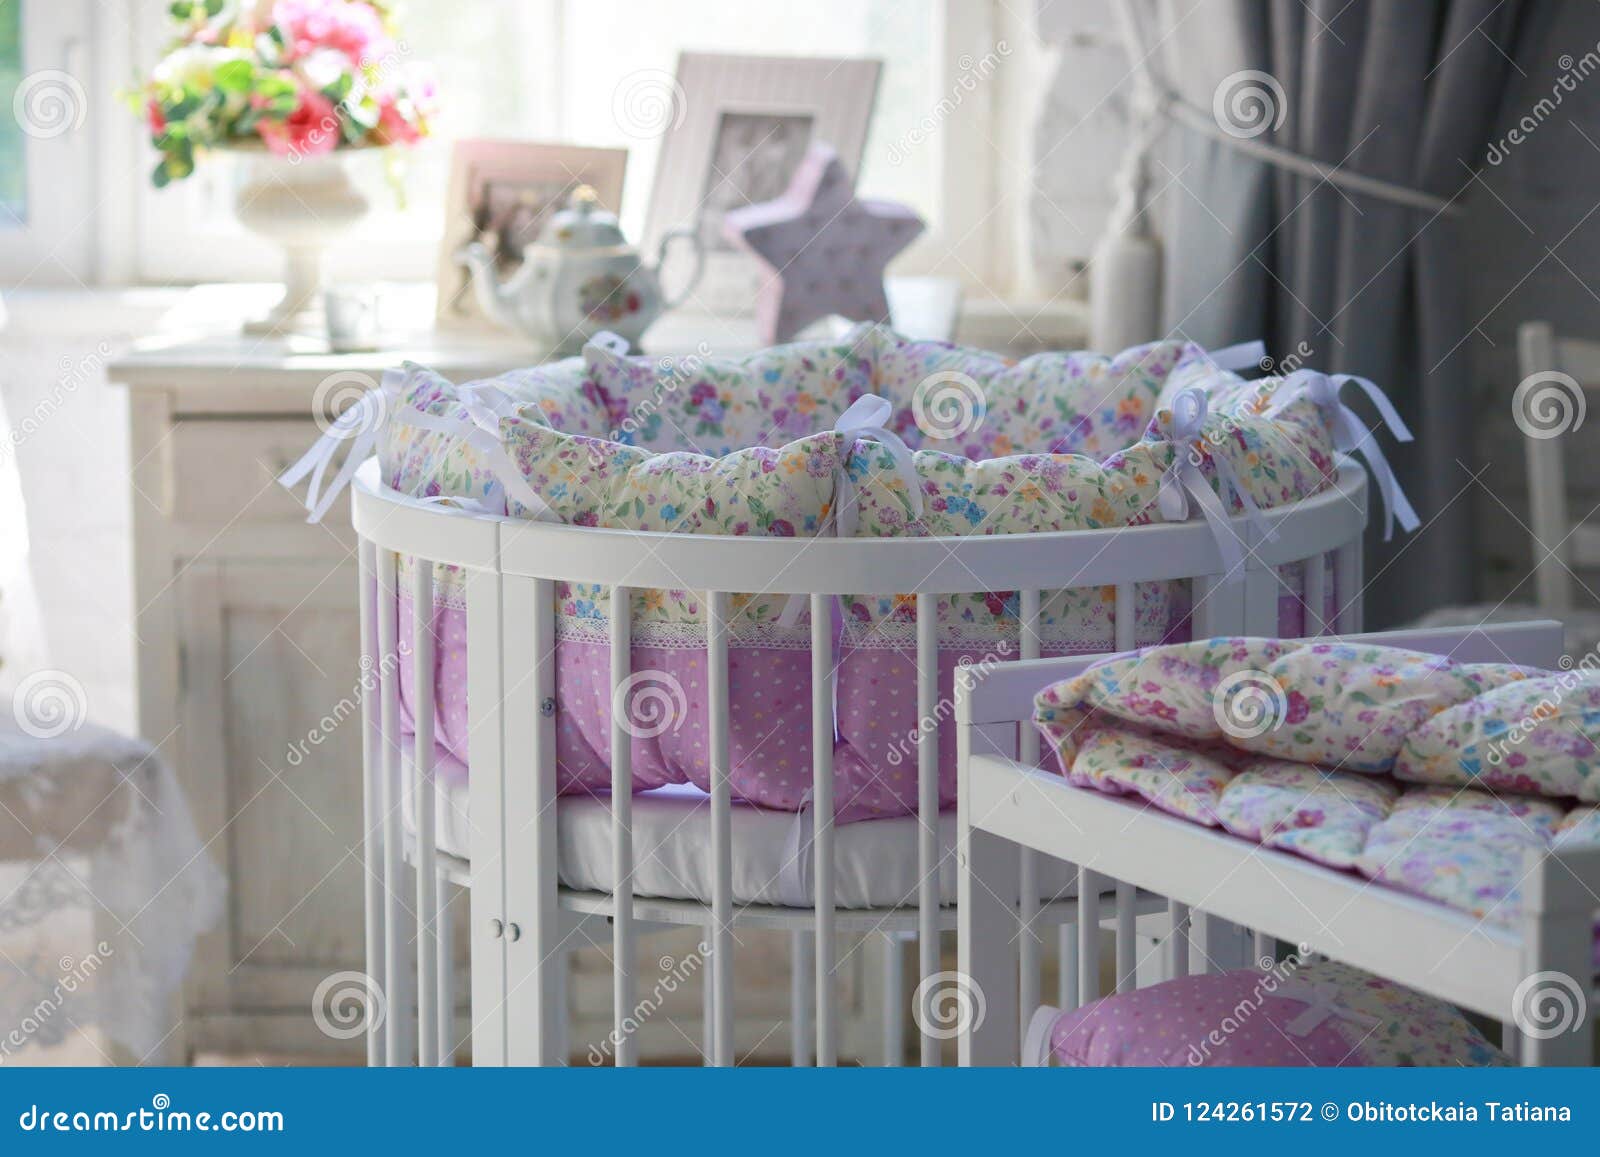 White Cribs For Babies Round Shape Stock Photo Image Of Bedding